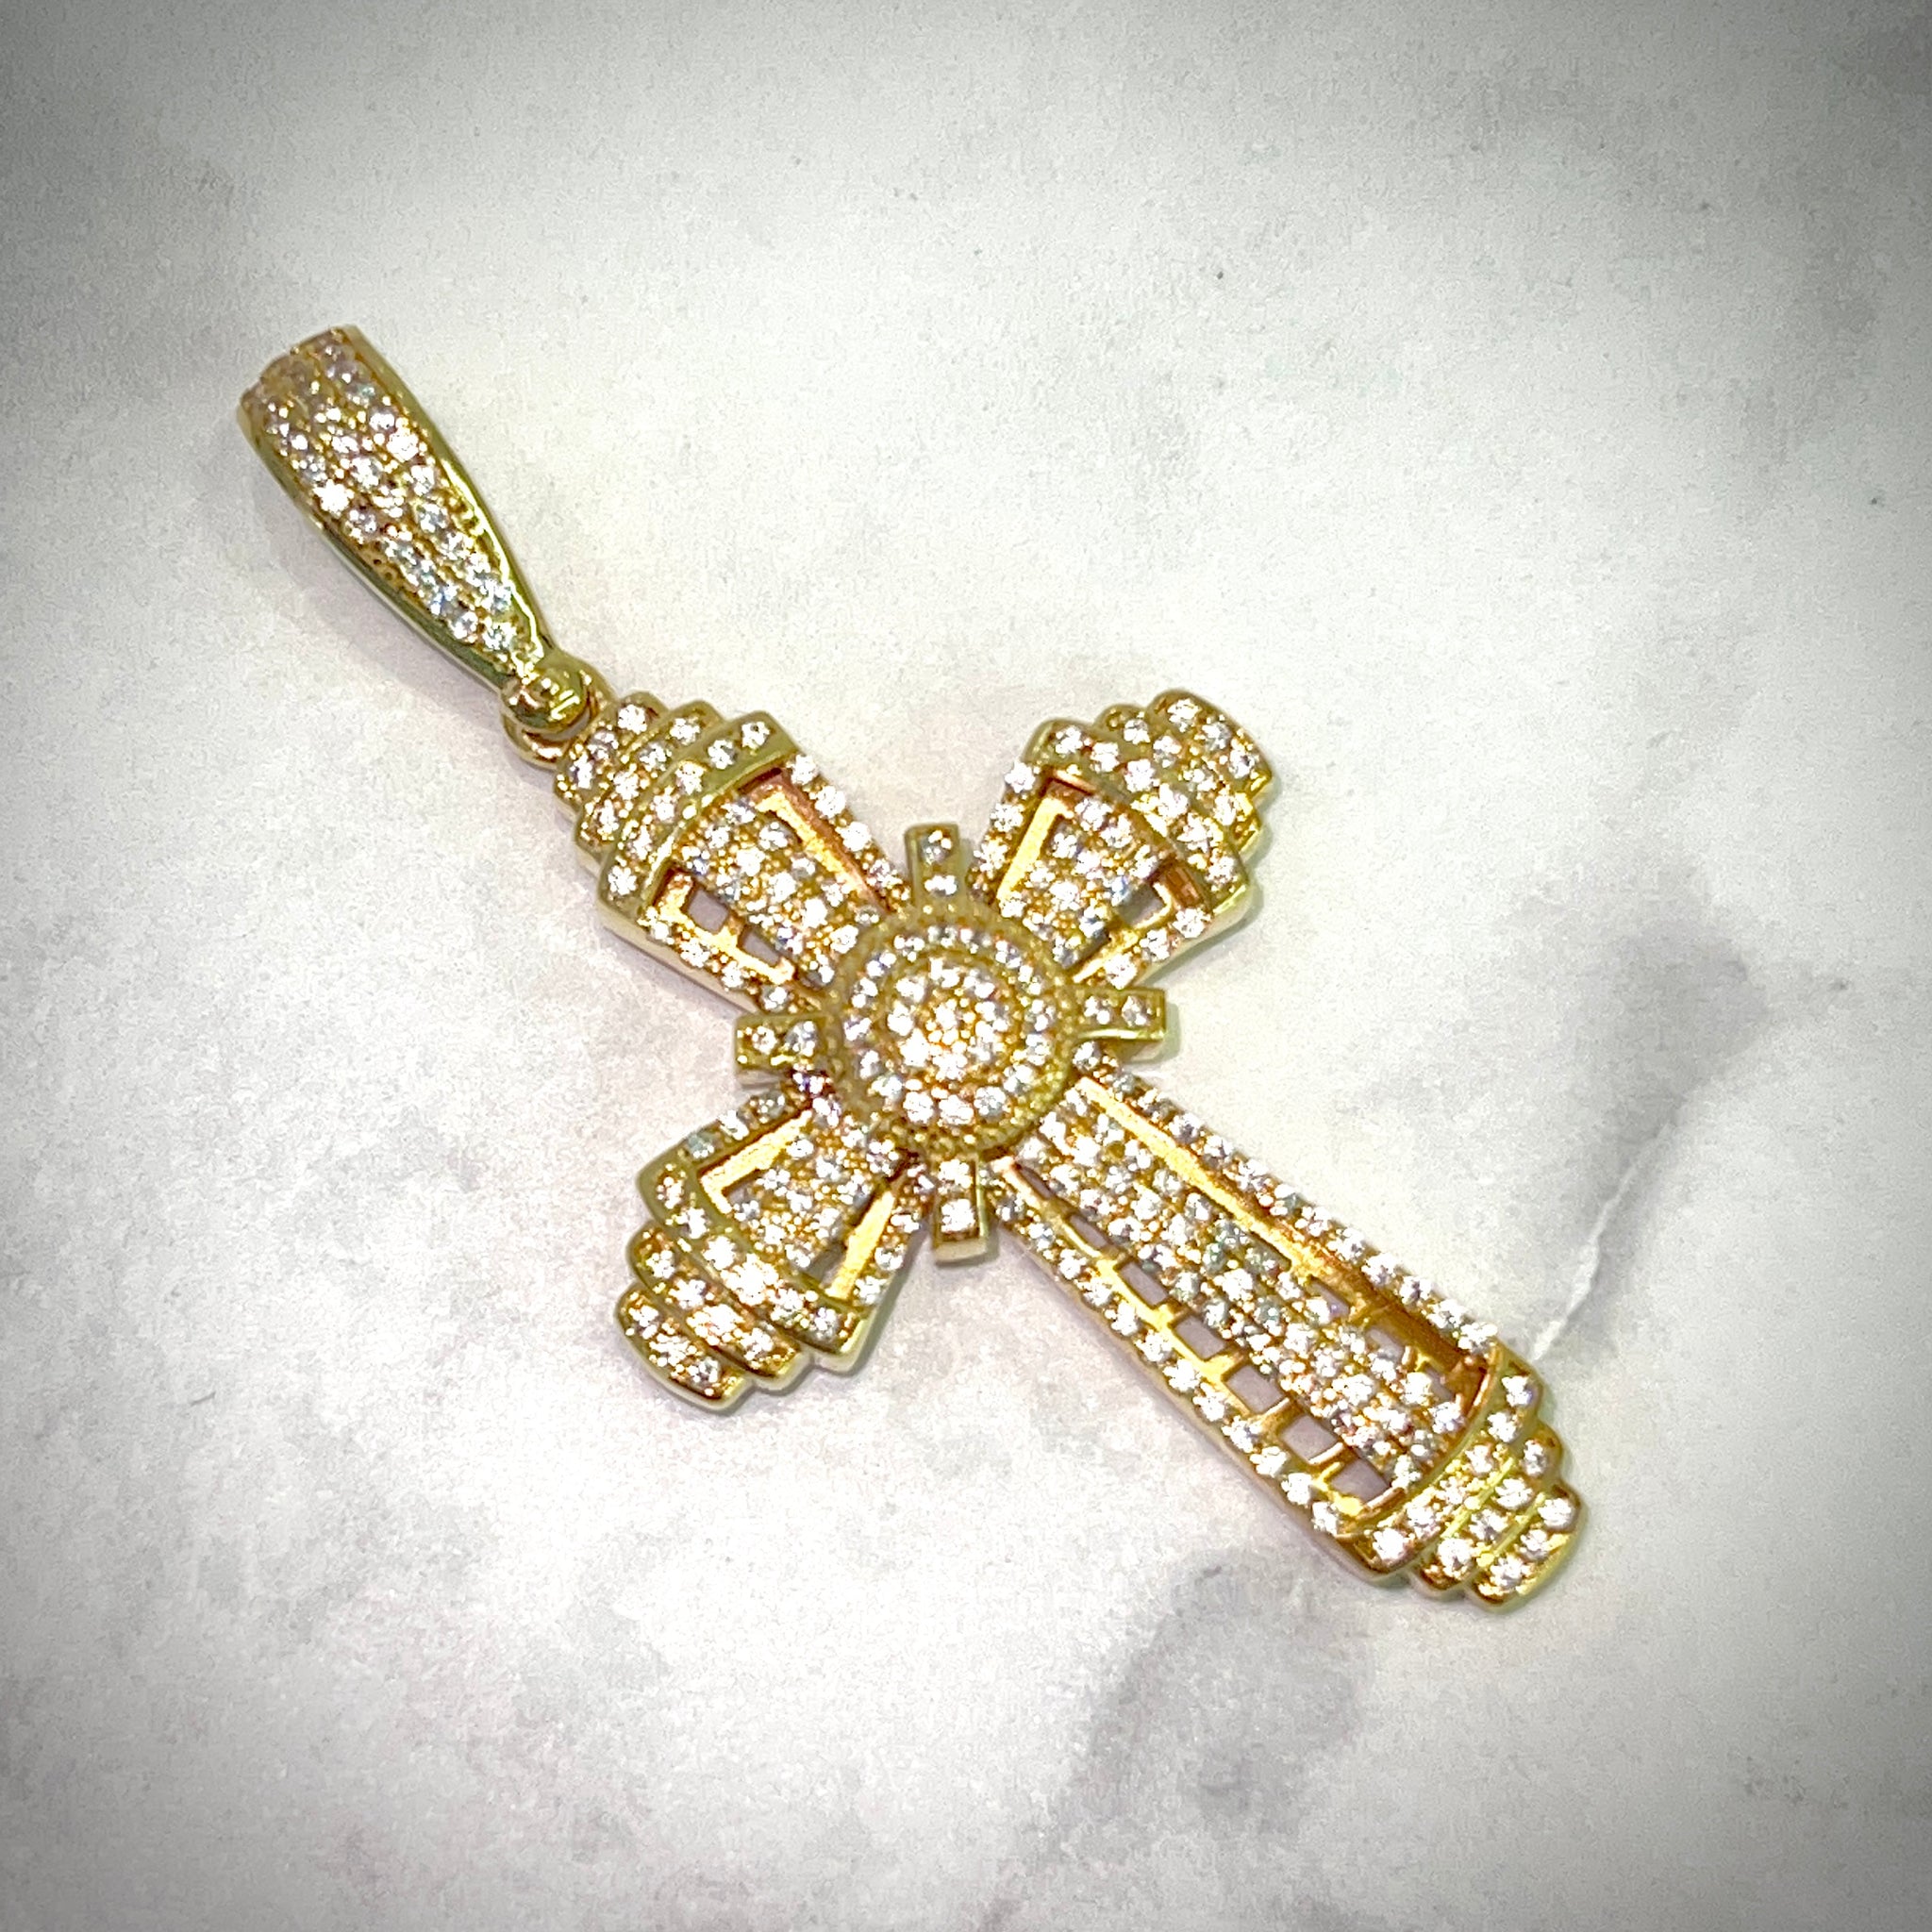 Cross Pendant "Iced Out" - 14 carat gold